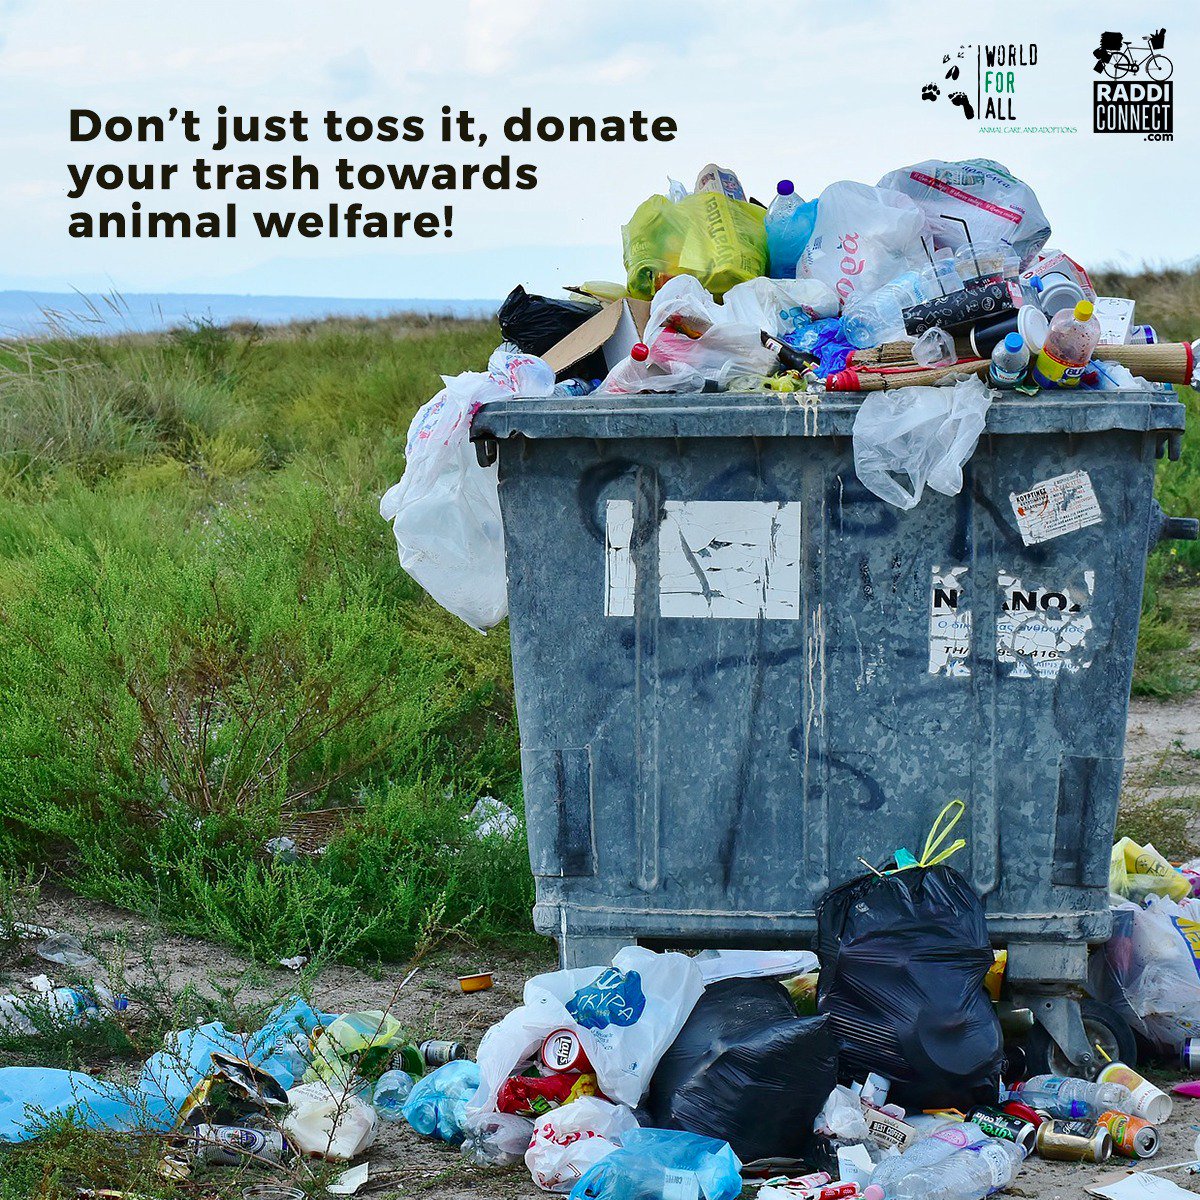 Paper, plastic, glass and metal, everything can be recycled and it gets better! Proceeds from the recycling are donated towards animal welfare. Get in touch with @RaddiConnect now and book a pick up from your door step. Call 9004240004.